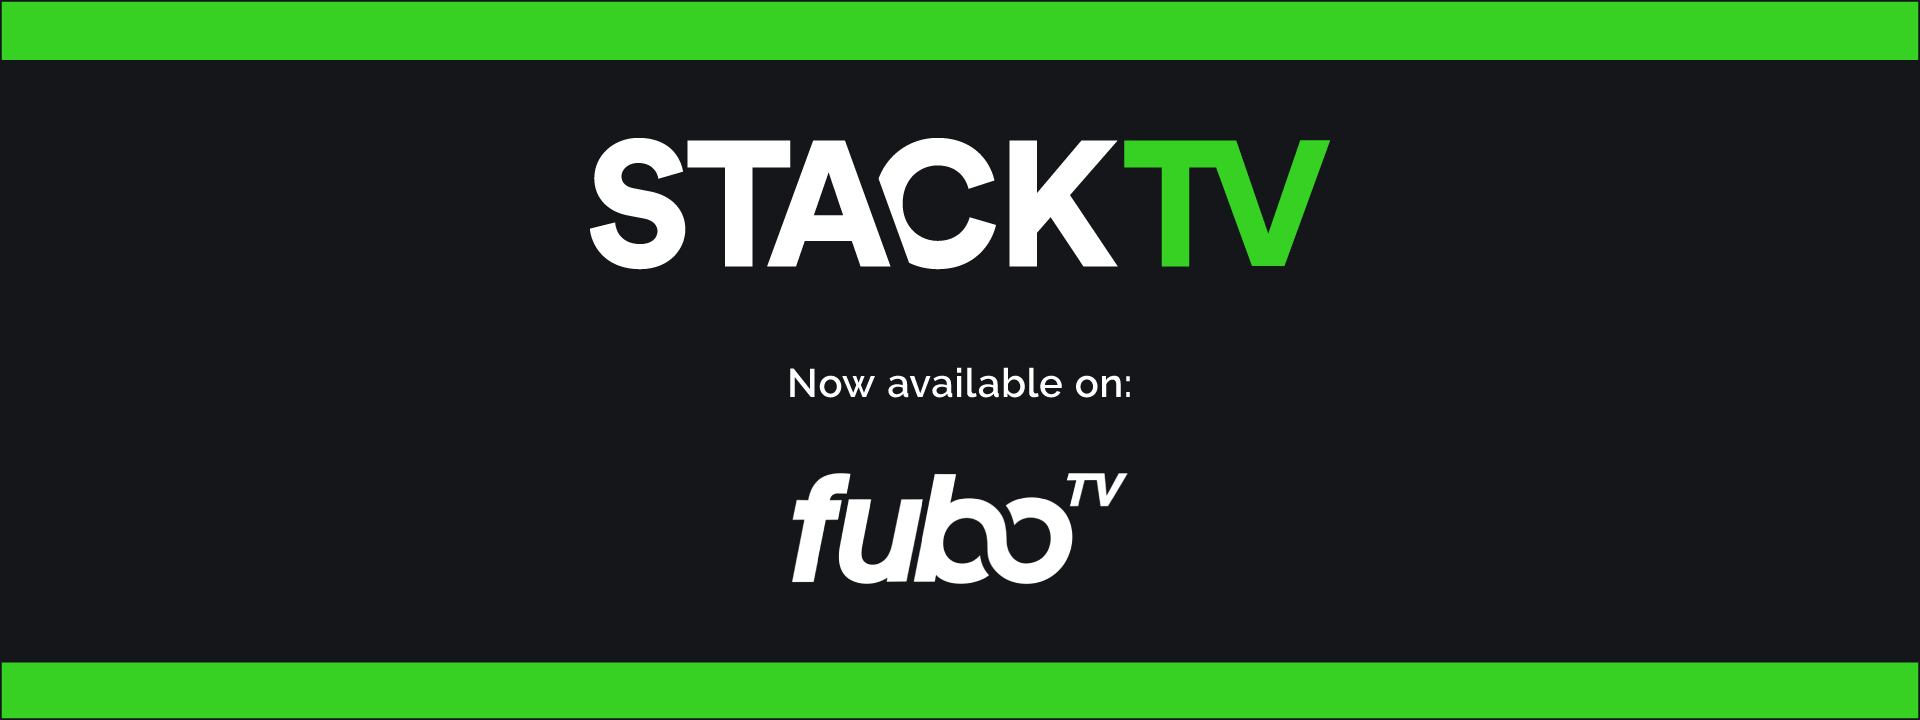 STACKTV'S SUITE OF HIT SHOWS AND MOVIES NOW AVAILABLE ON FUBOTV - Corus  Entertainment